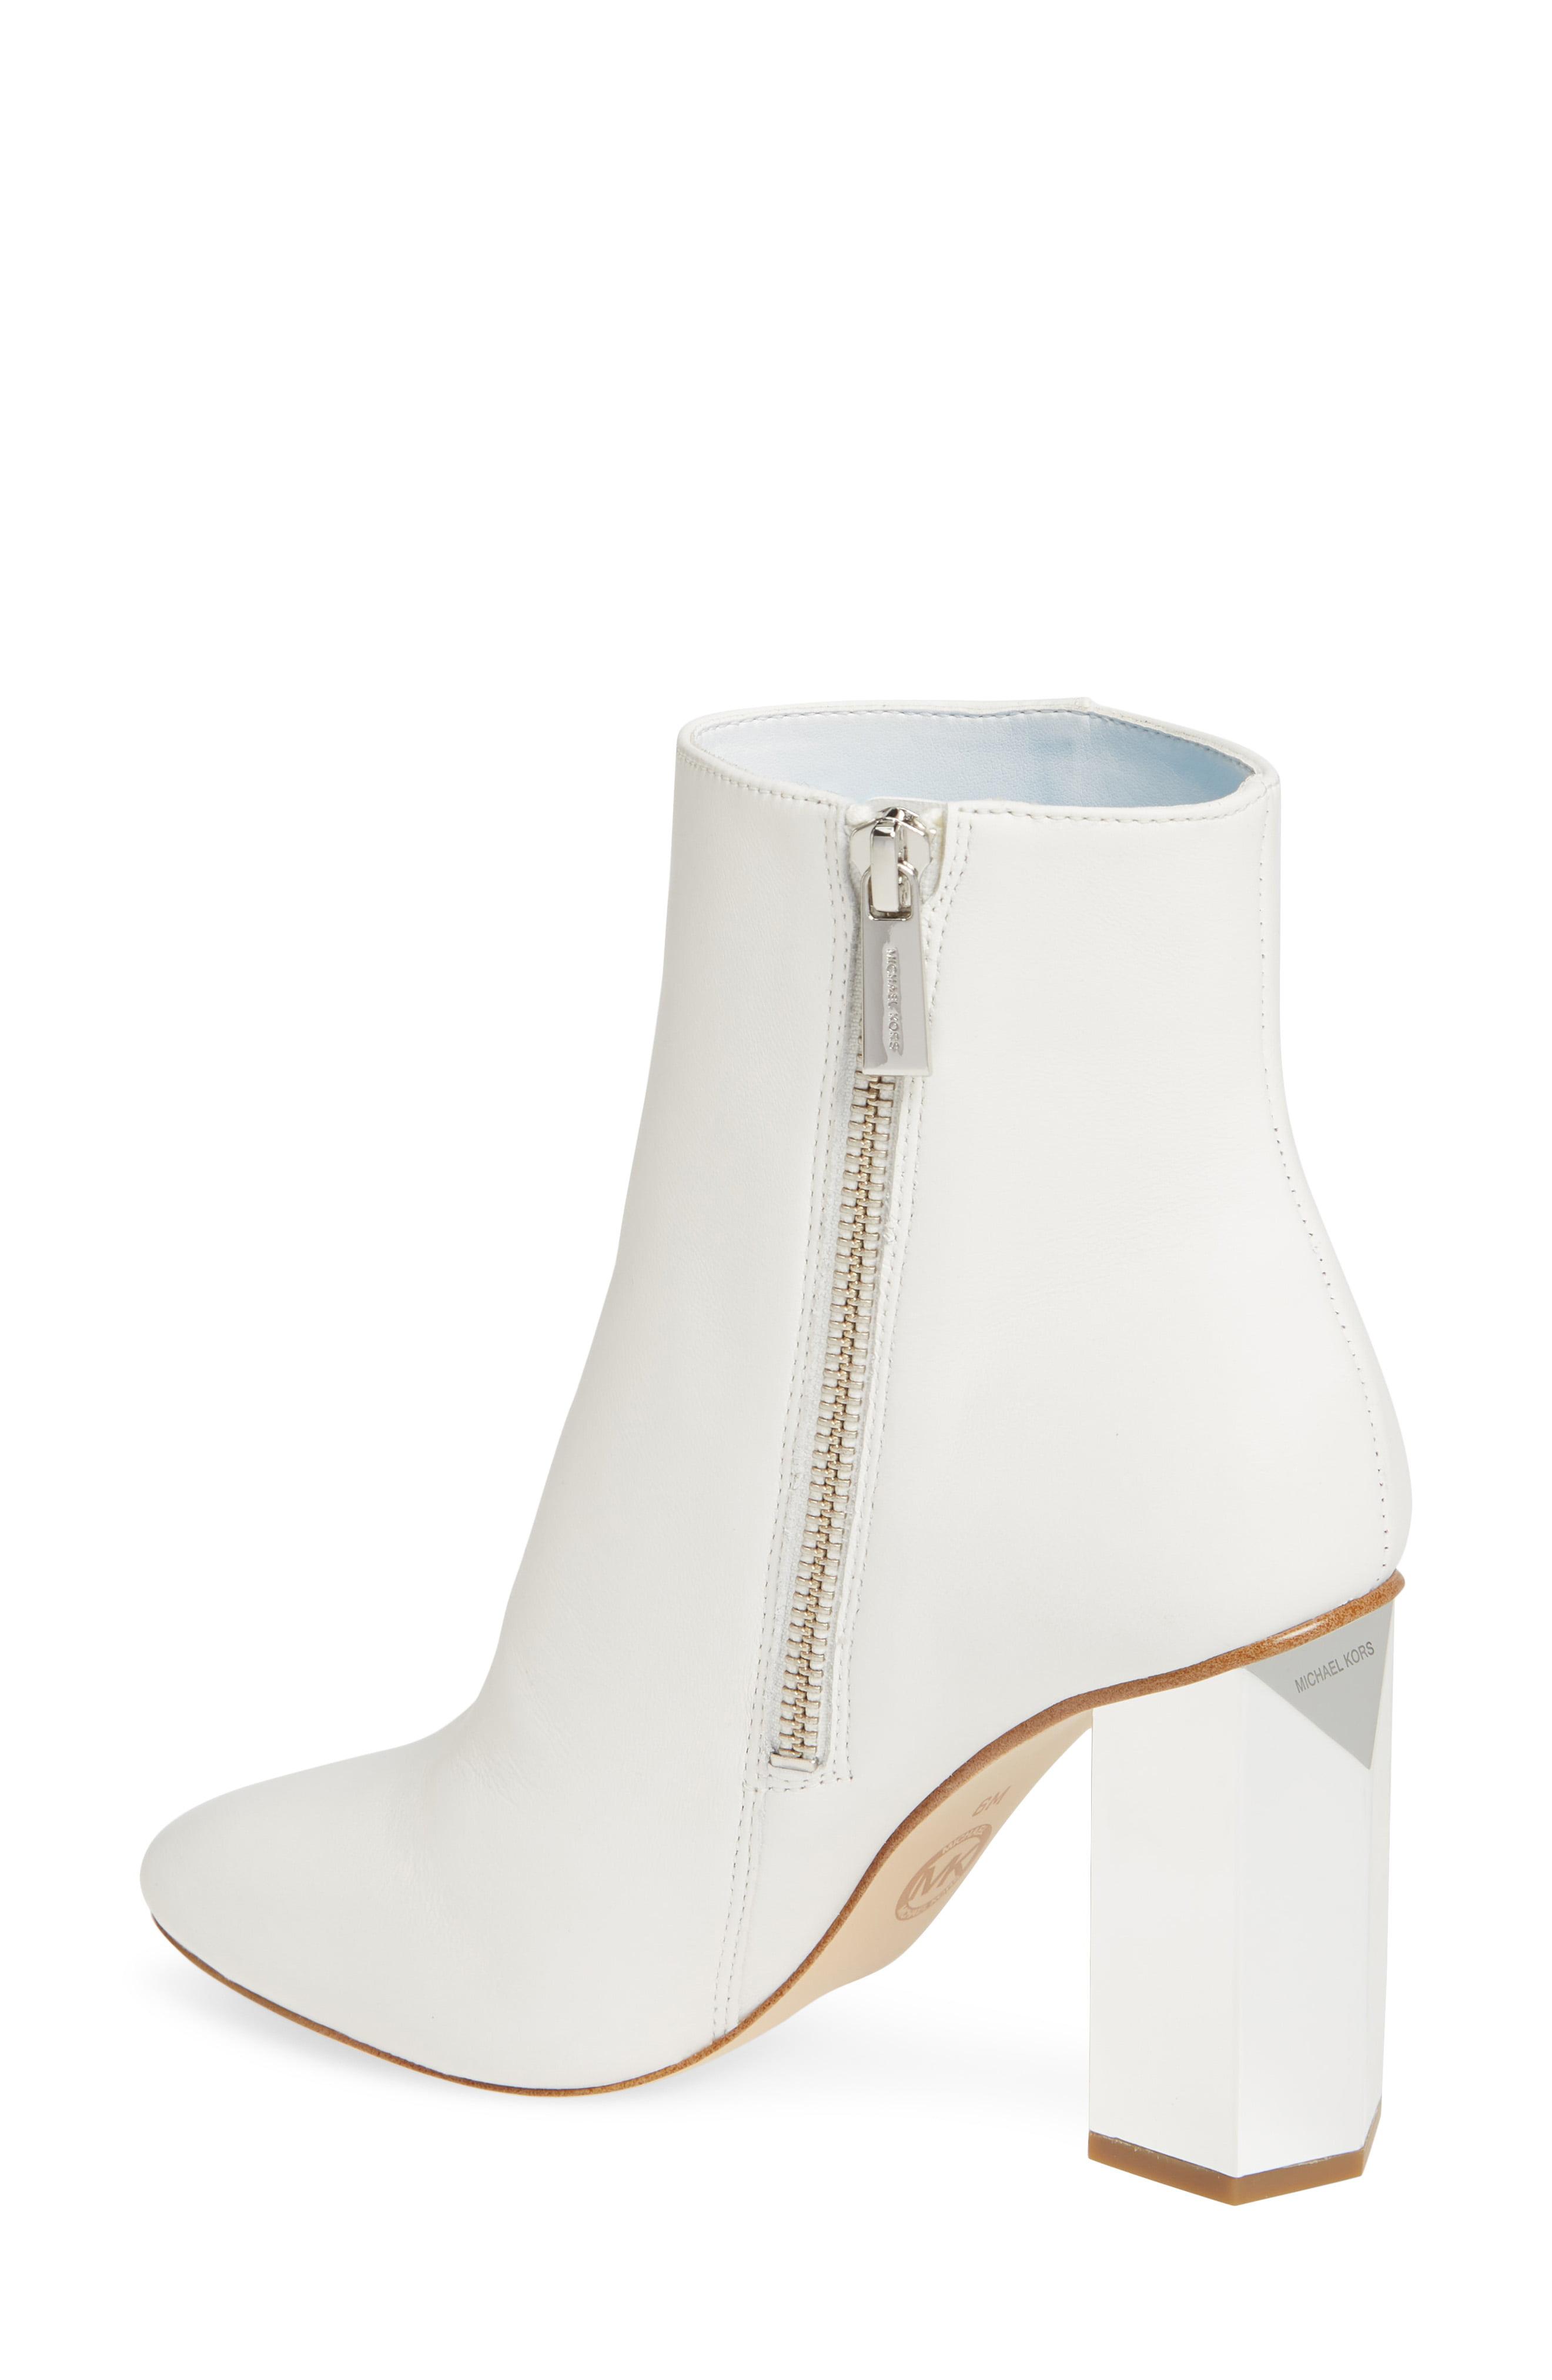 michael kors white ankle boots